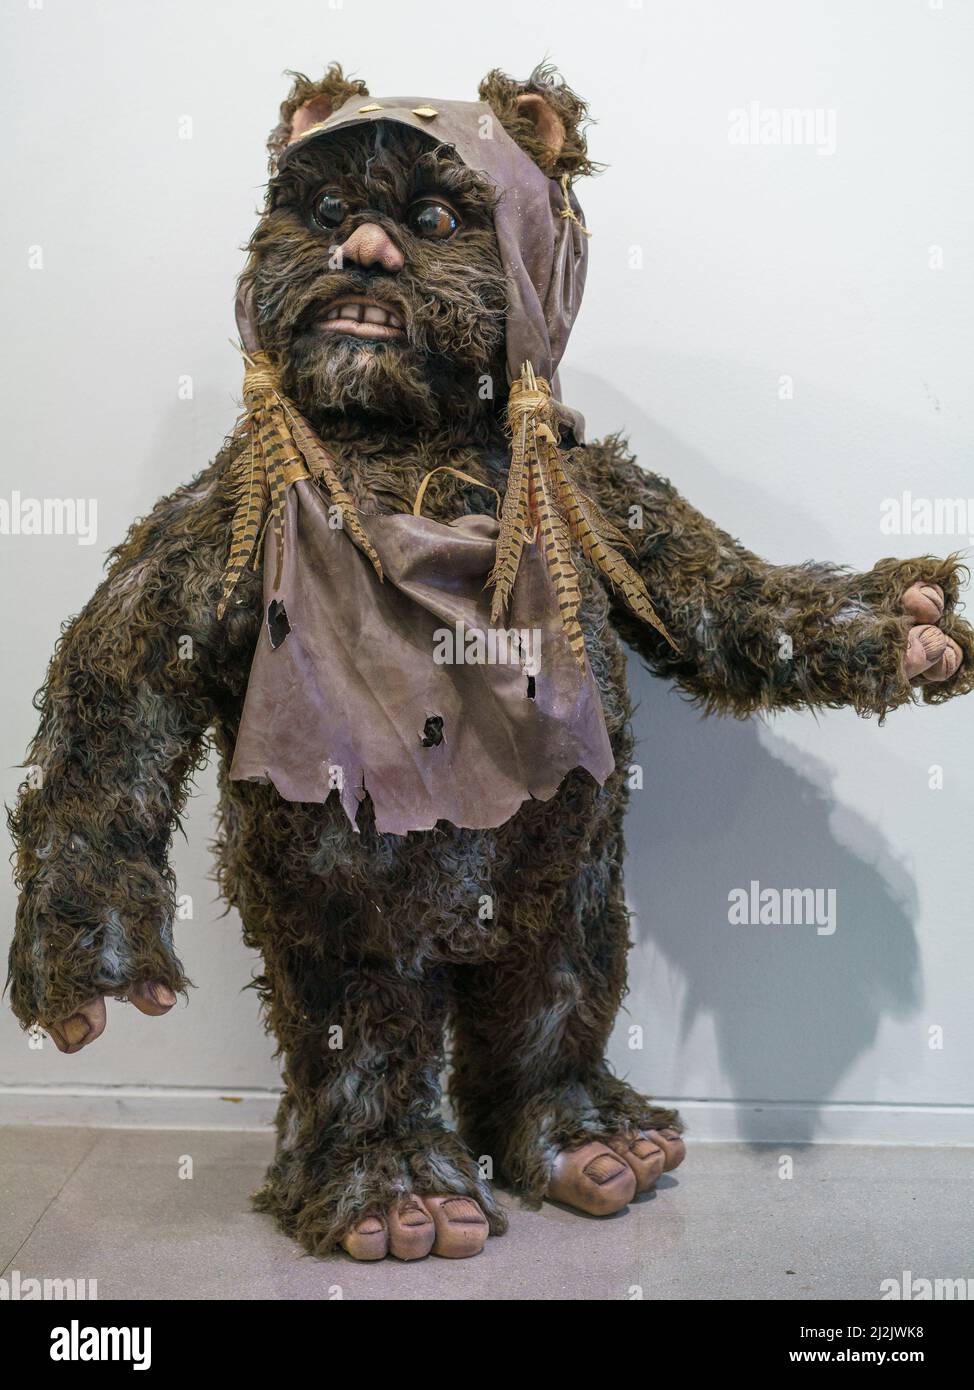 A figure of the character Ewok is exhibited during the exhibition of 'the Star Wars universe' by the sculptor Juan Villa at the Paco de Lucía exhibition hall in Madrid. The Star Wars universe can be visited for free until April 28 at the Paco de Lucía exhibition hall. The exhibited pieces are part of the work that this master craftsman is developing with his team for the future permanent exhibition Puerto Espacio, a science fiction project of his own. Stock Photo